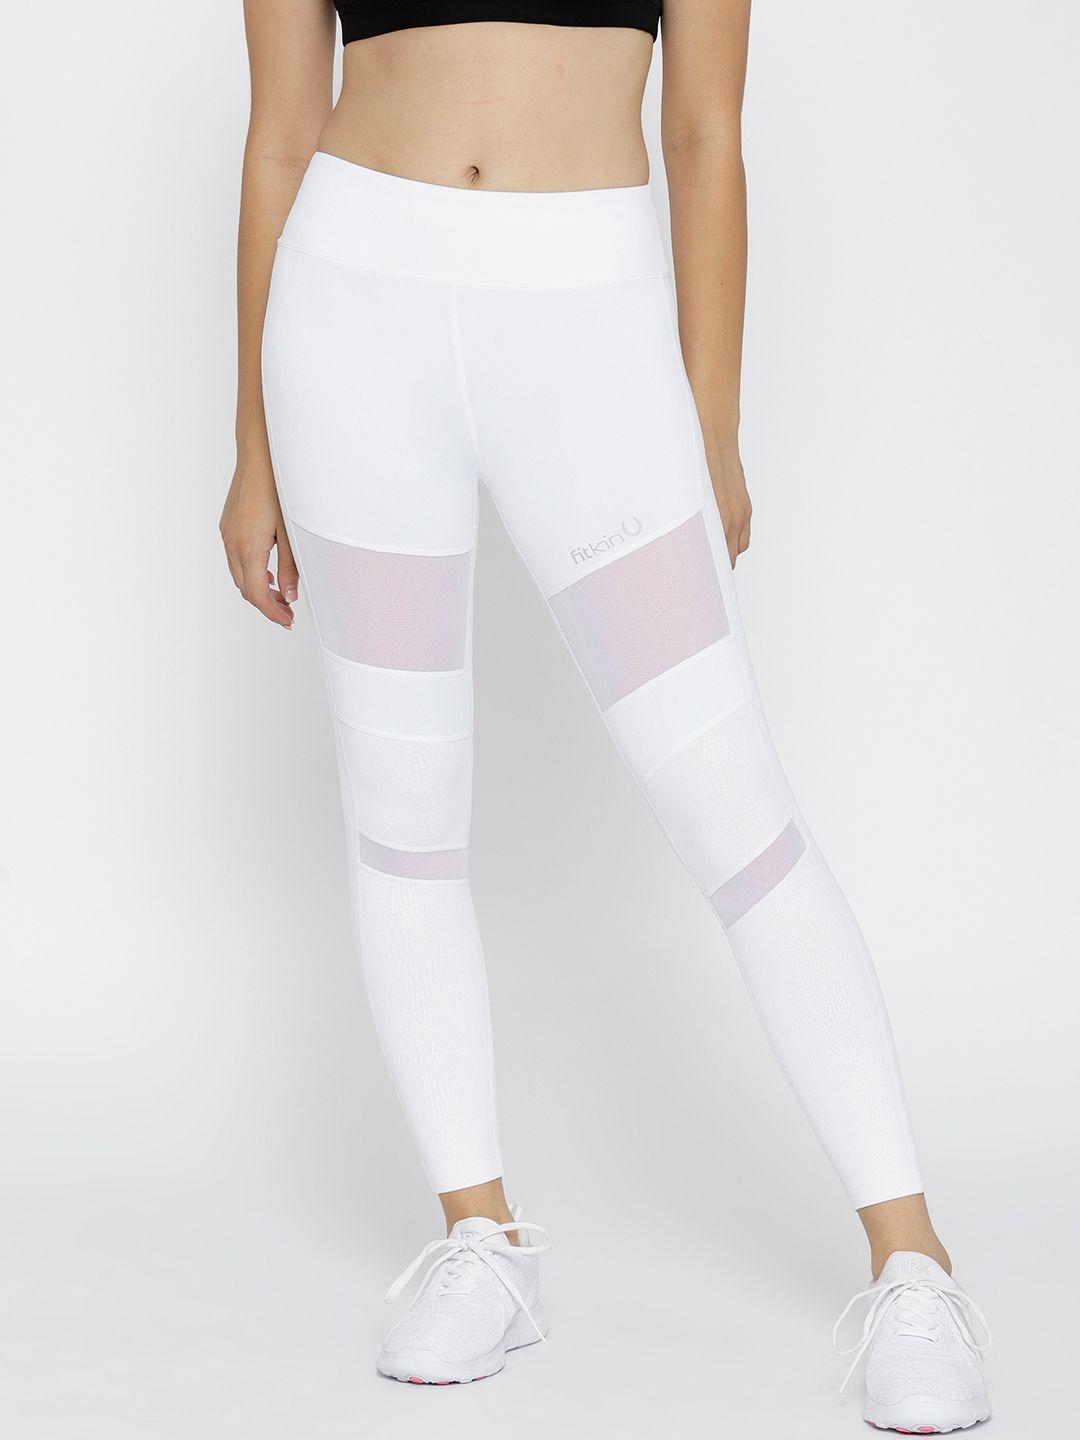 fitkin white solid mesh panel inserted quick dry tights